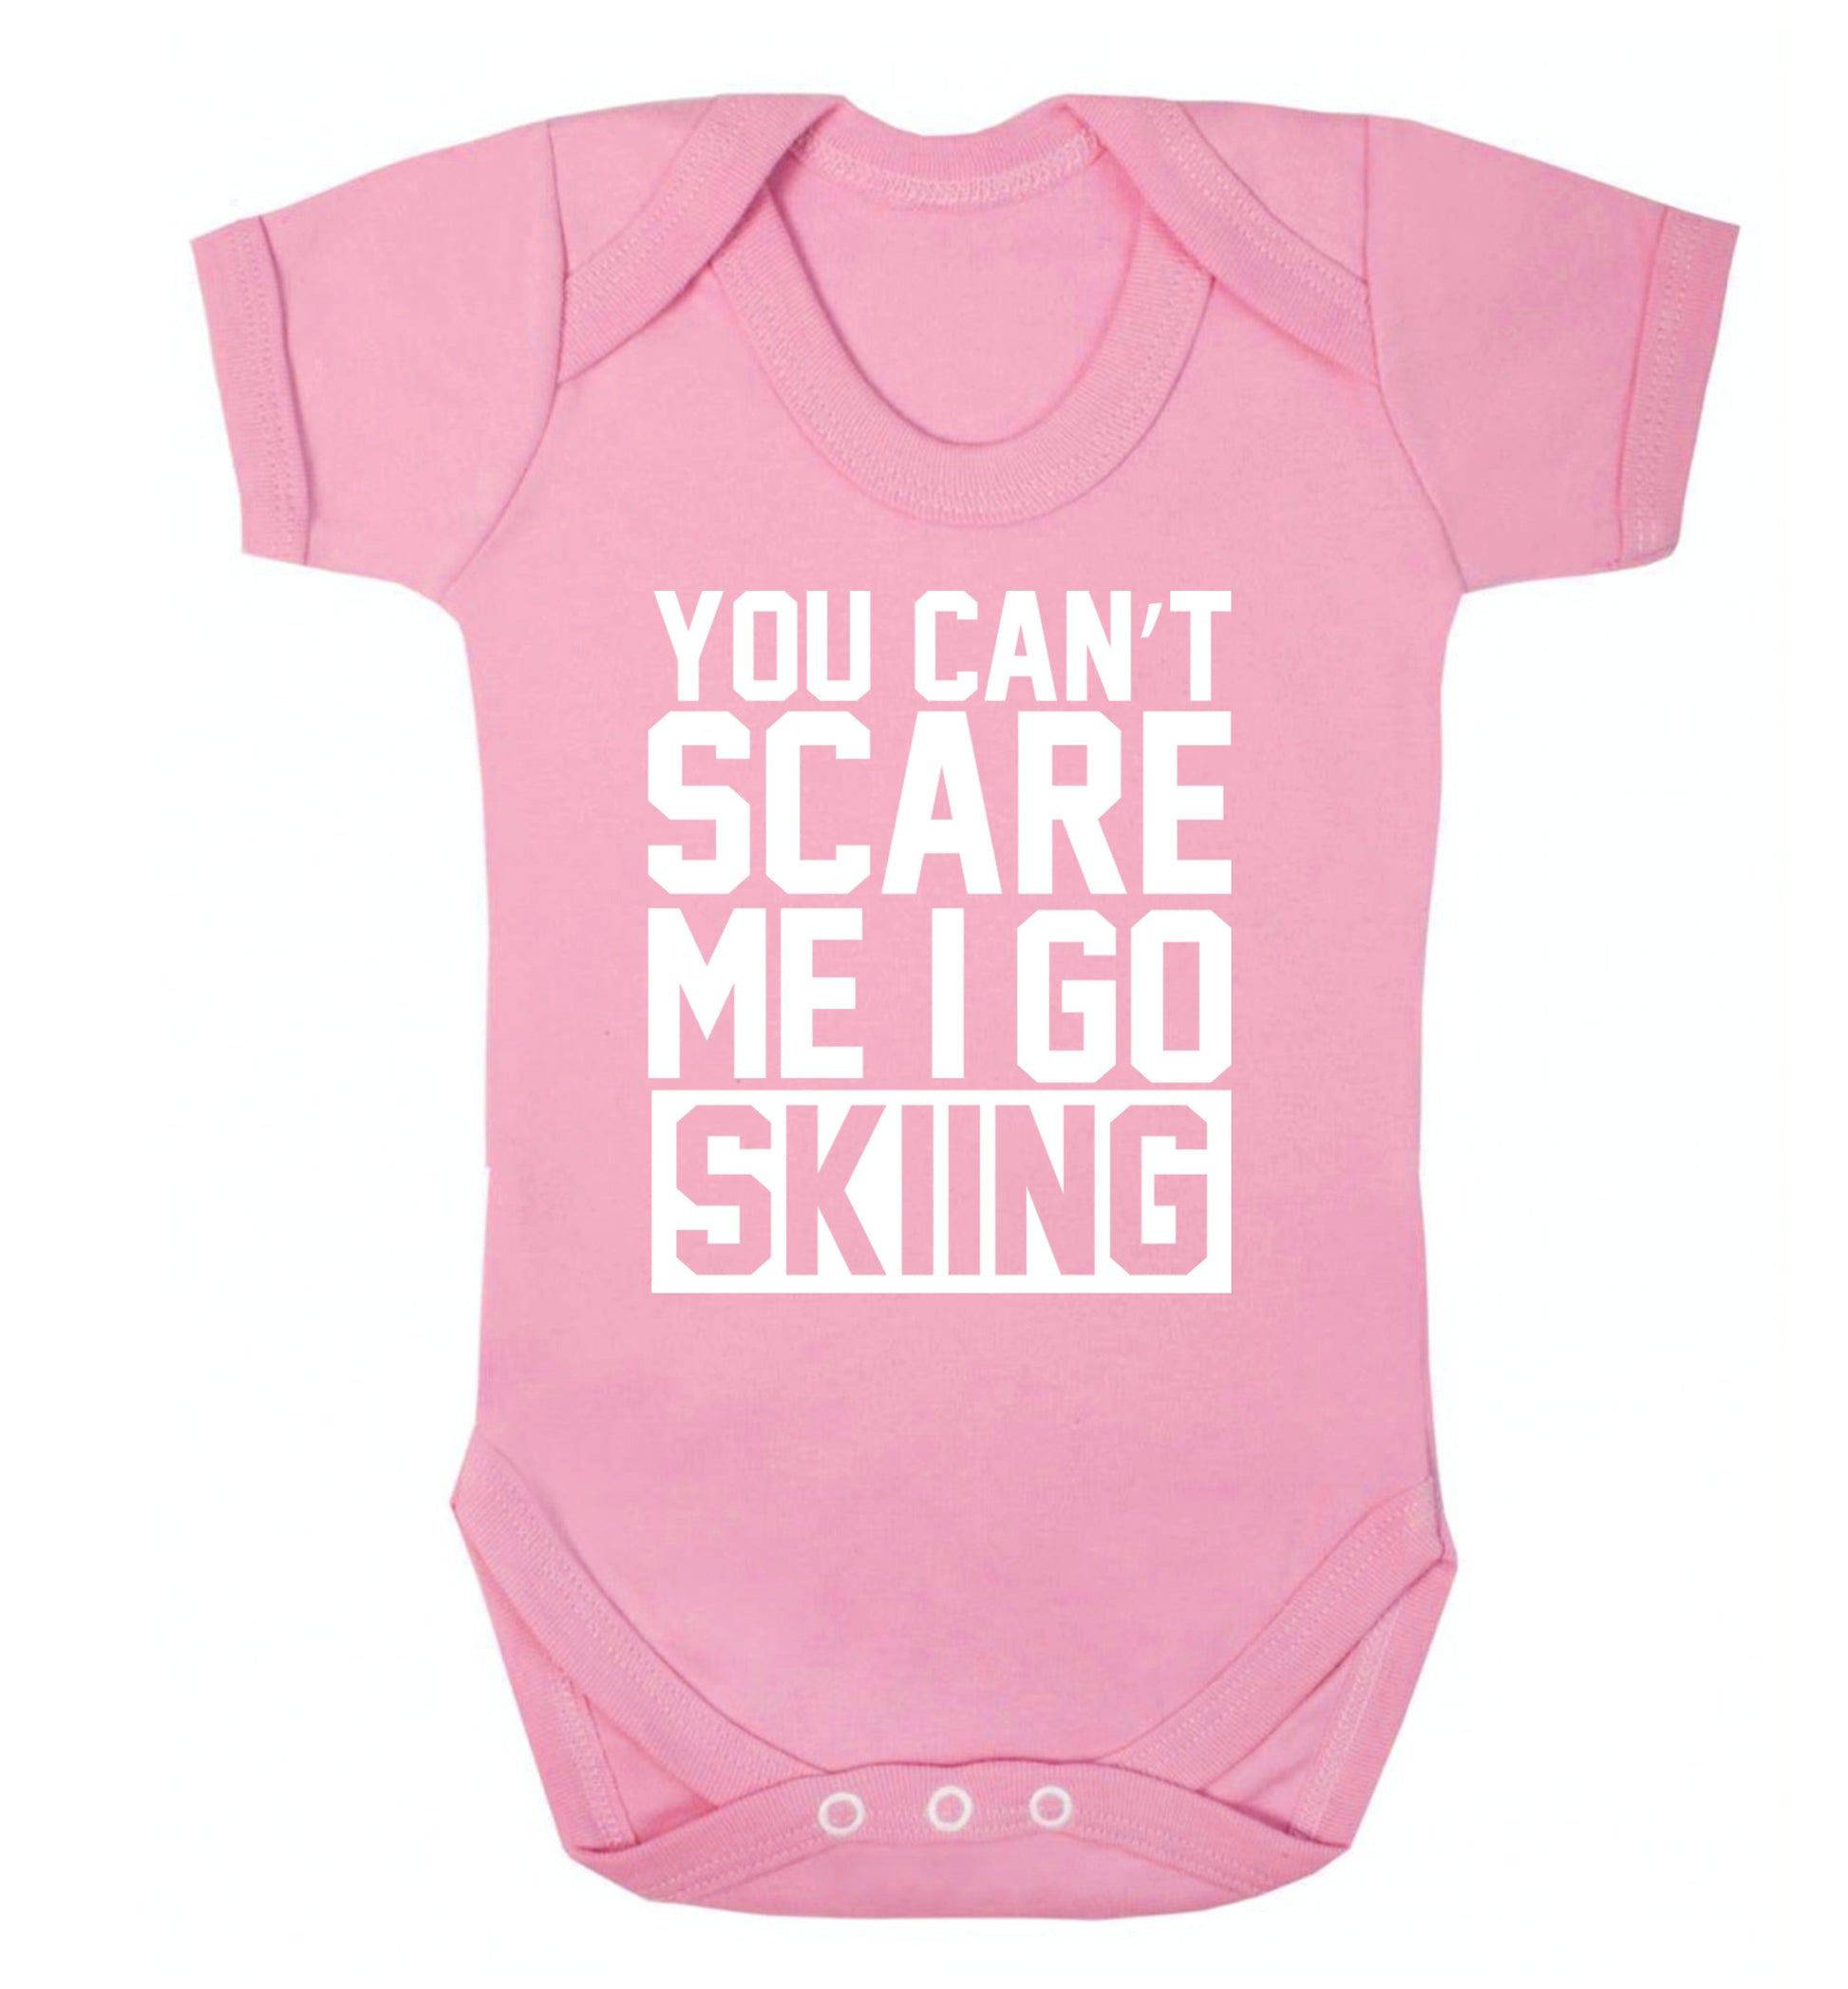 You can't scare me I go skiing Baby Vest pale pink 18-24 months